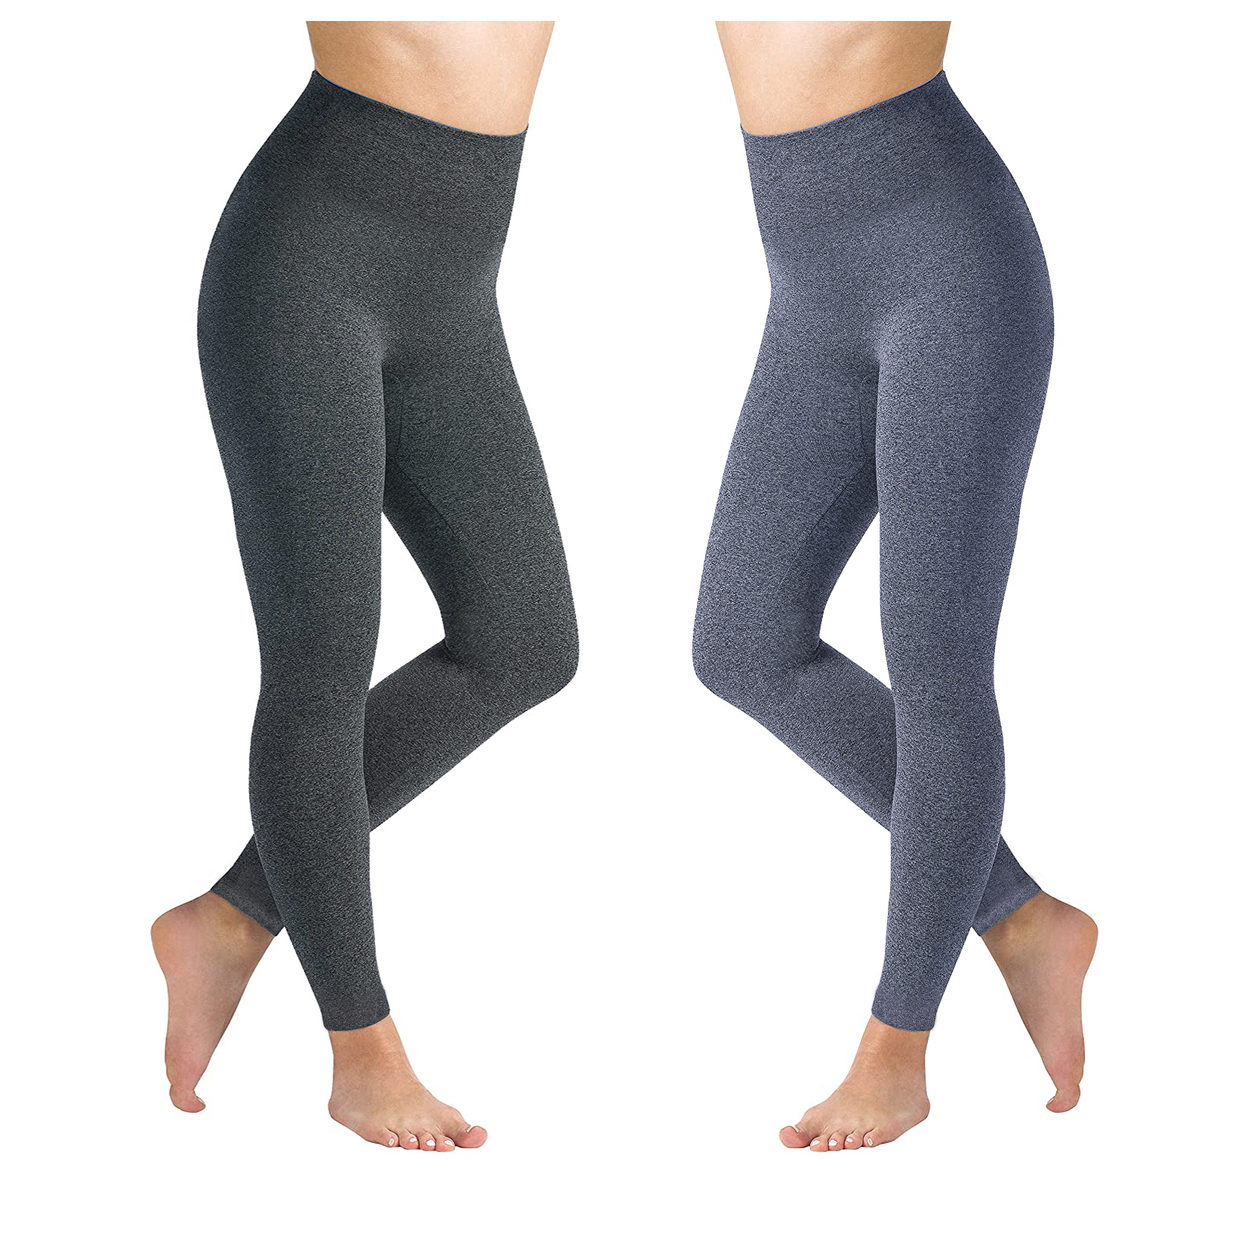 2-Pack: Women's High Waisted Ultra Soft Fleece Lined Warm Marled Leggings(Available In Plus Sizes) - Charcoal & Navy, Small